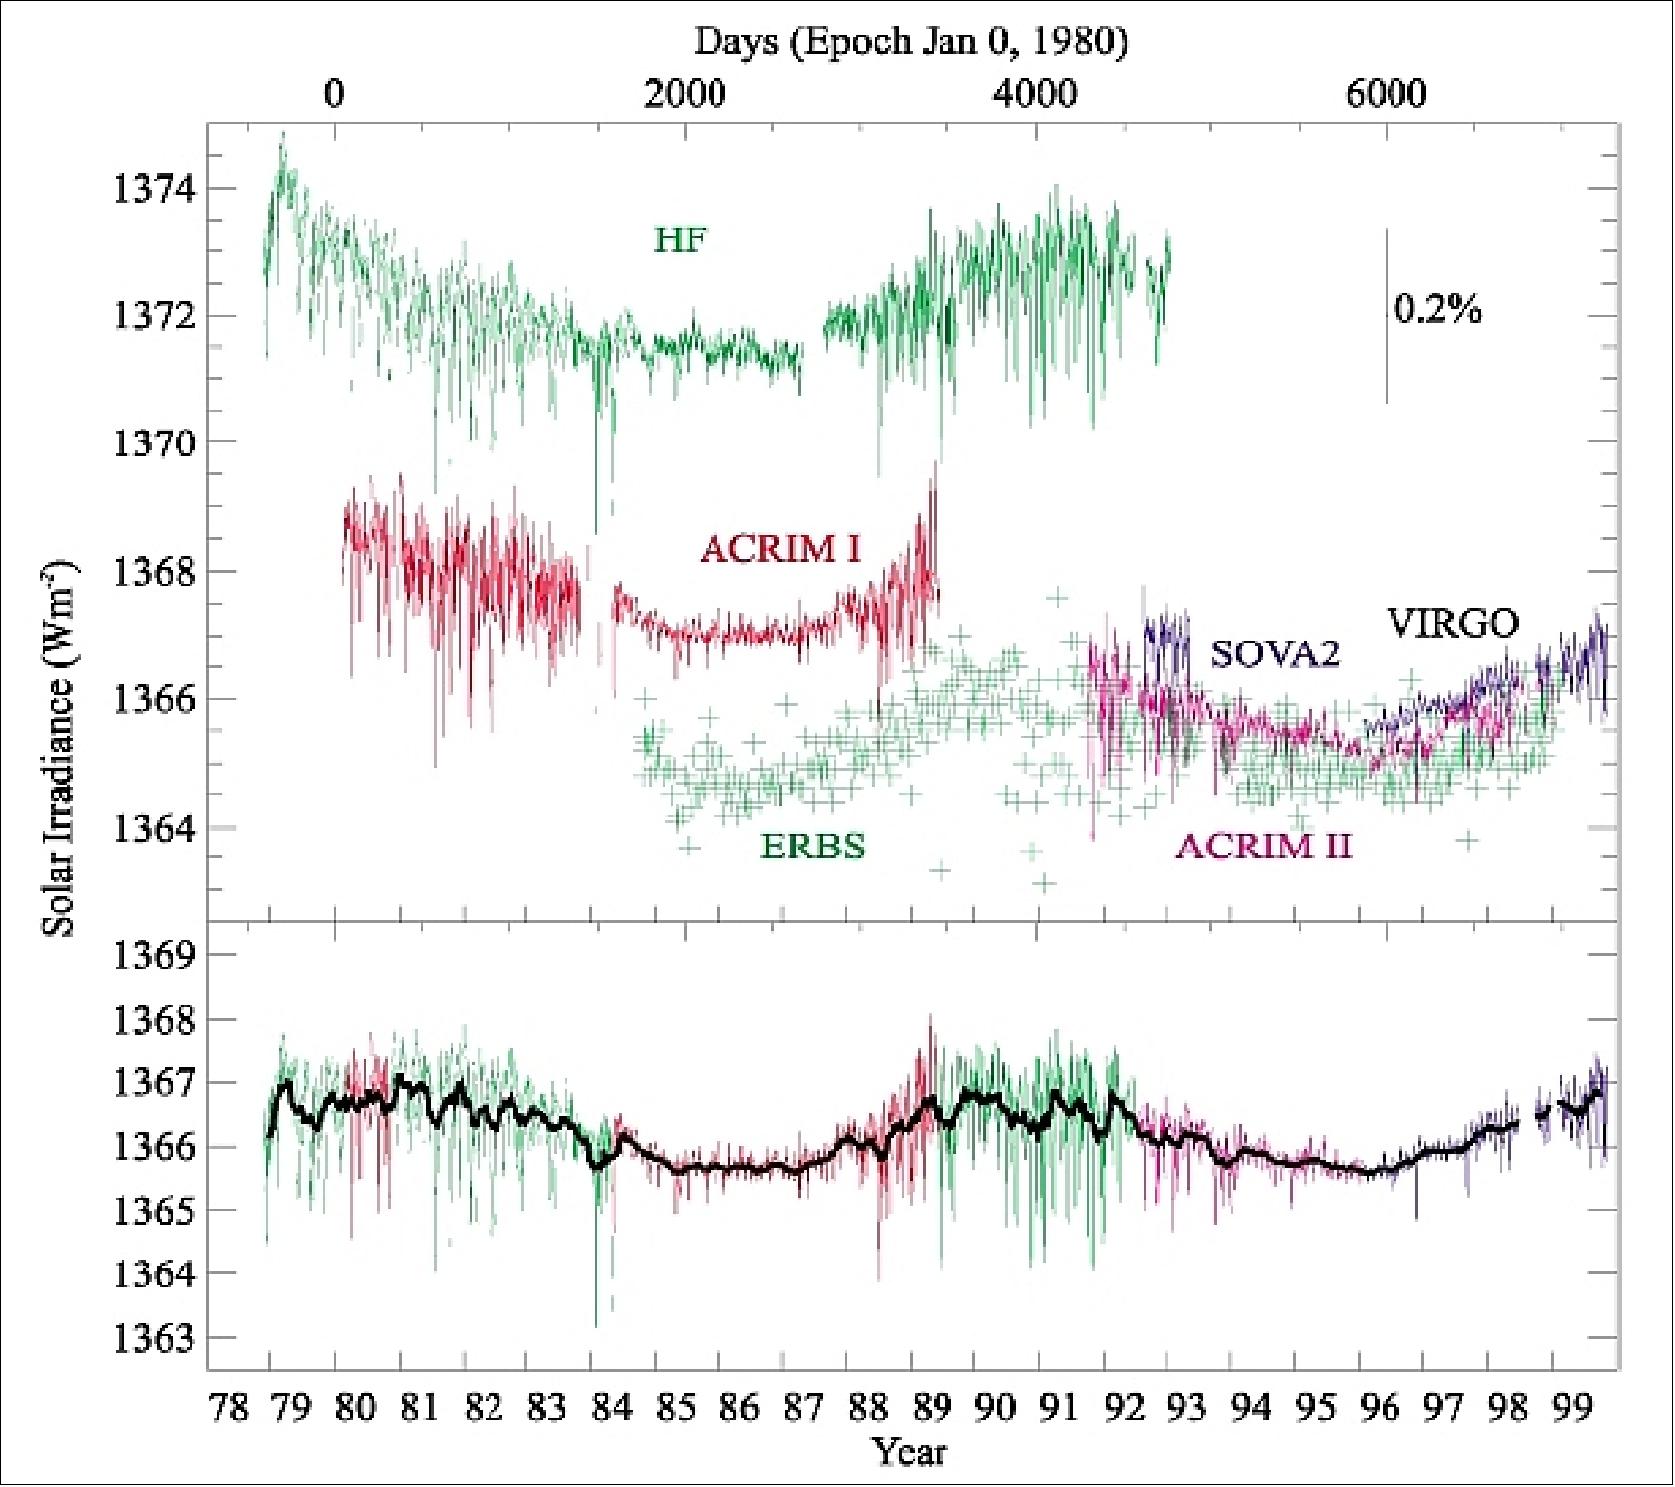 Figure 83: TSI monitoring results of various instruments in the period 1978 to 2000 (image credit: ESA, Ref. 119)